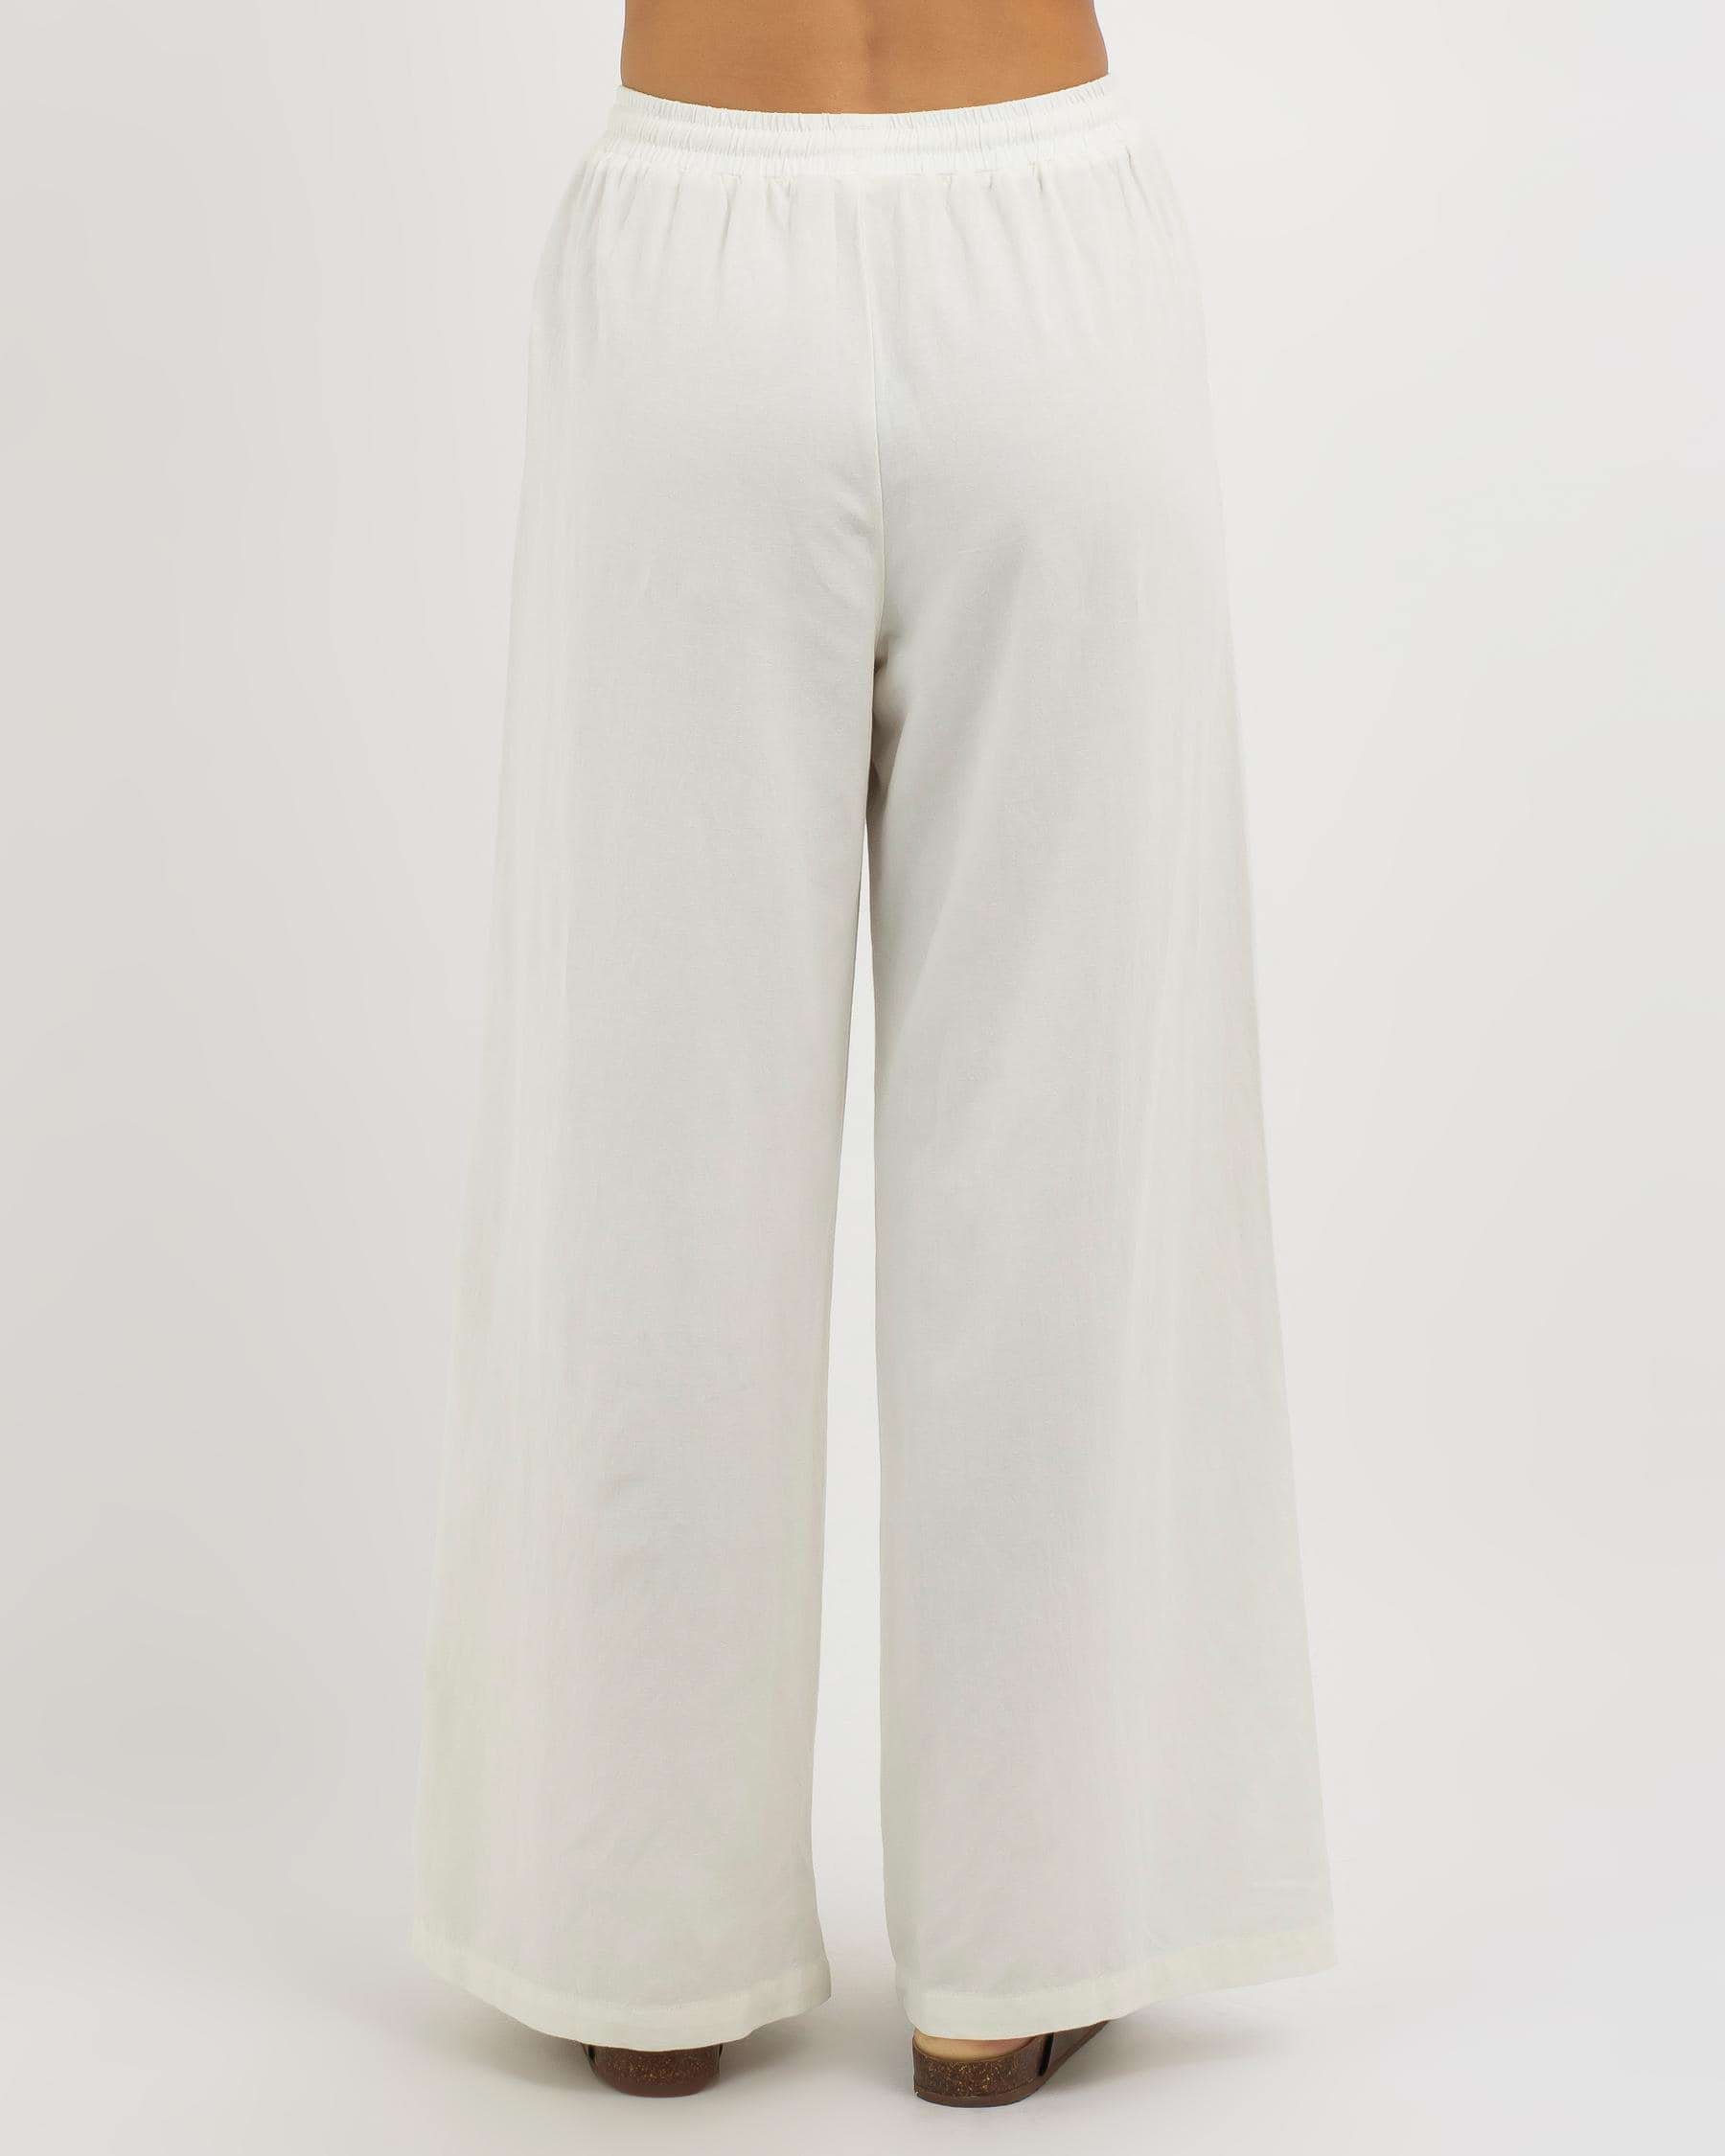 Rusty Alannah Pants In White - Fast Shipping & Easy Returns - City ...